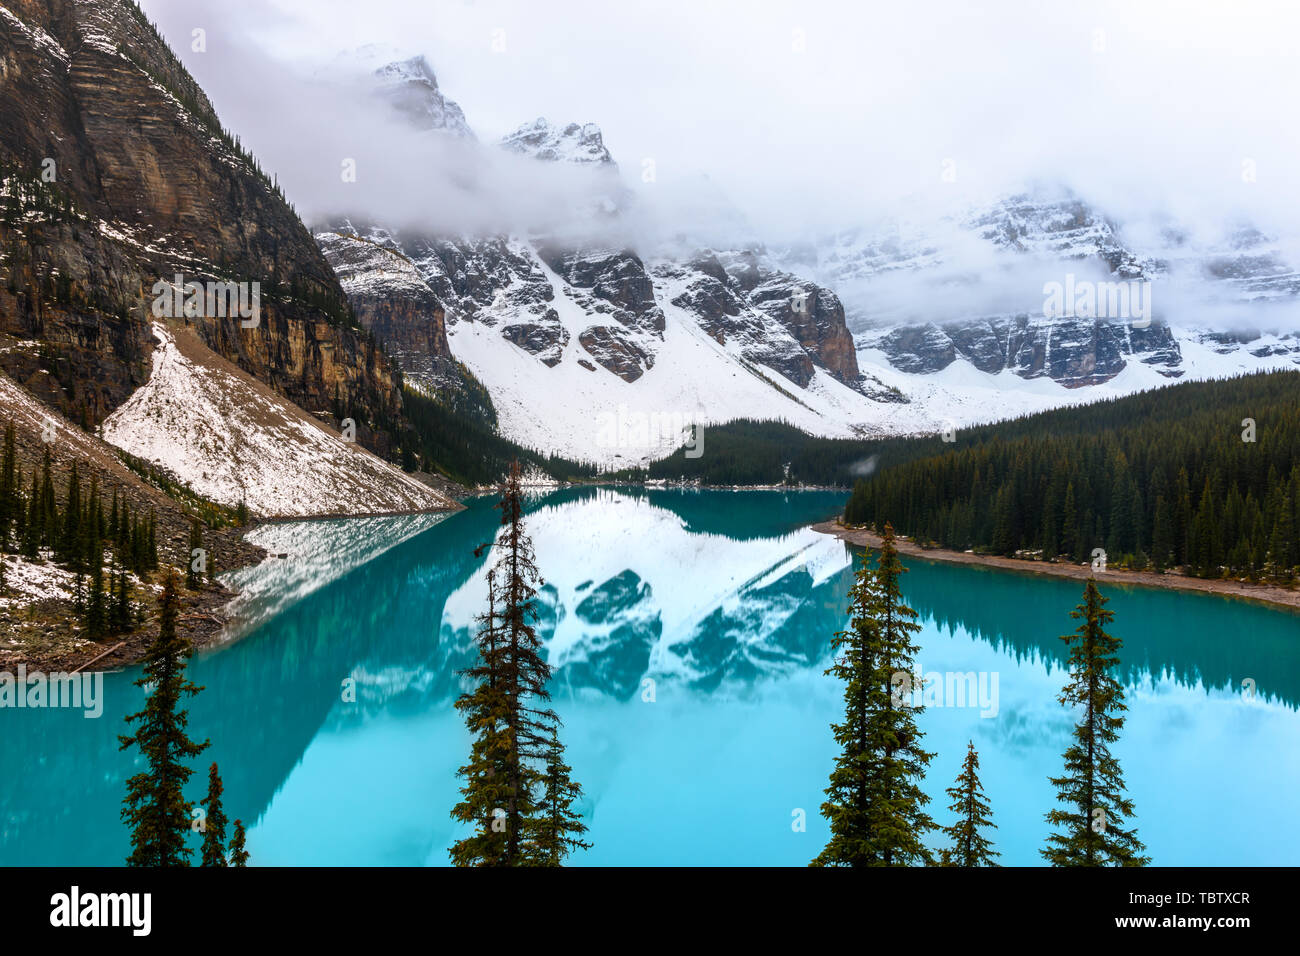 The famous moraine lake at a cloudy day in the Banff national park Stock Photo